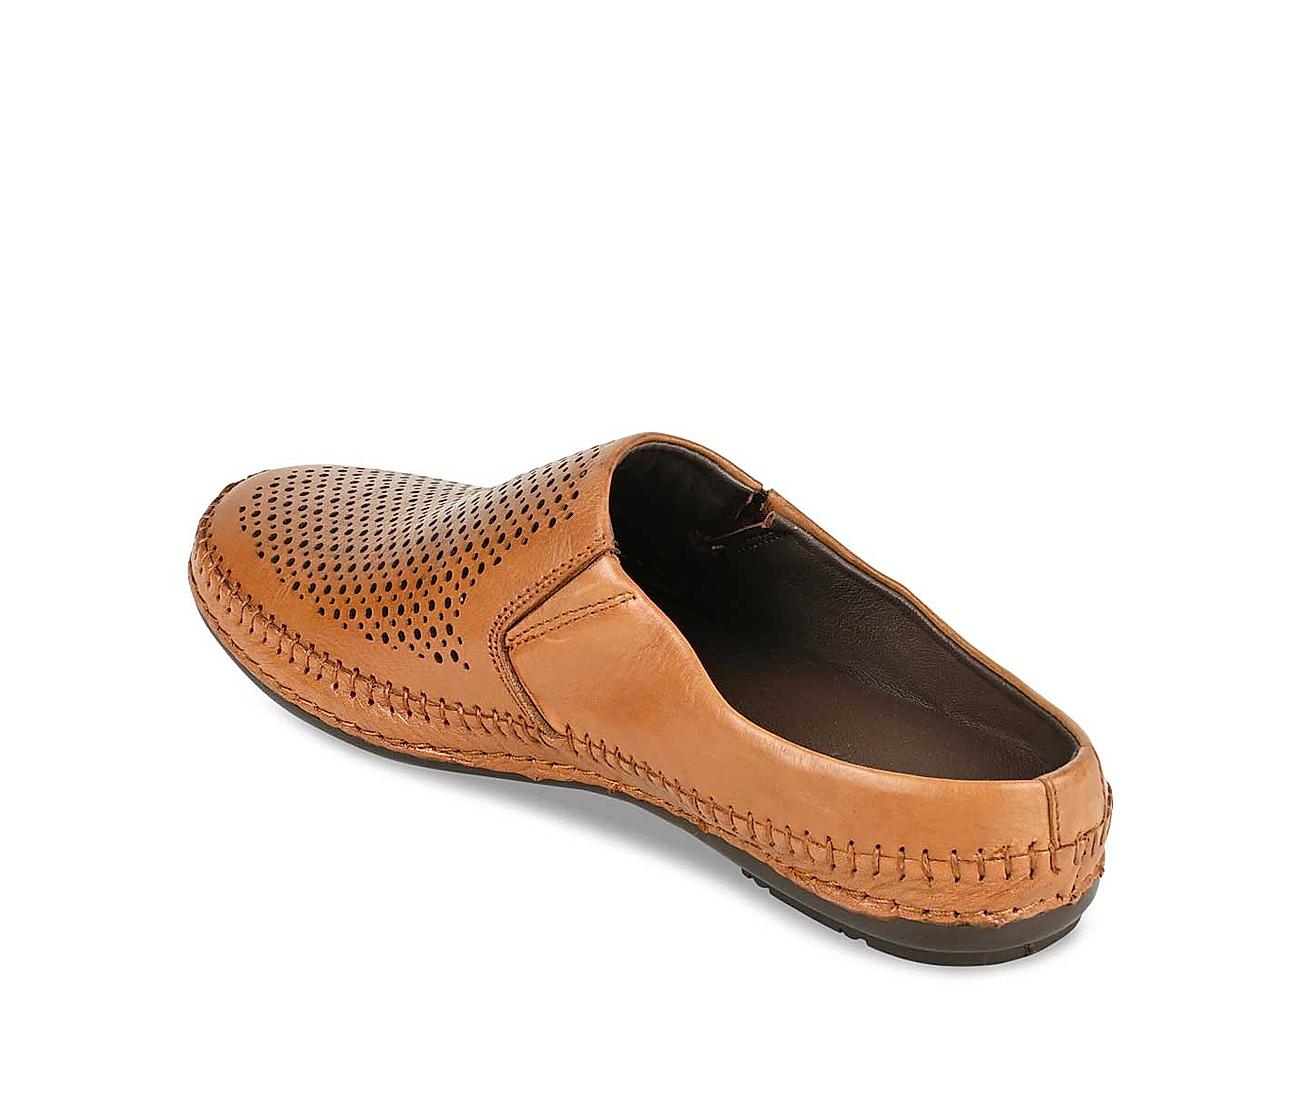 Resh Thailand - Regal Shoes Resoled with Vibram Studded... | Facebook-happymobile.vn